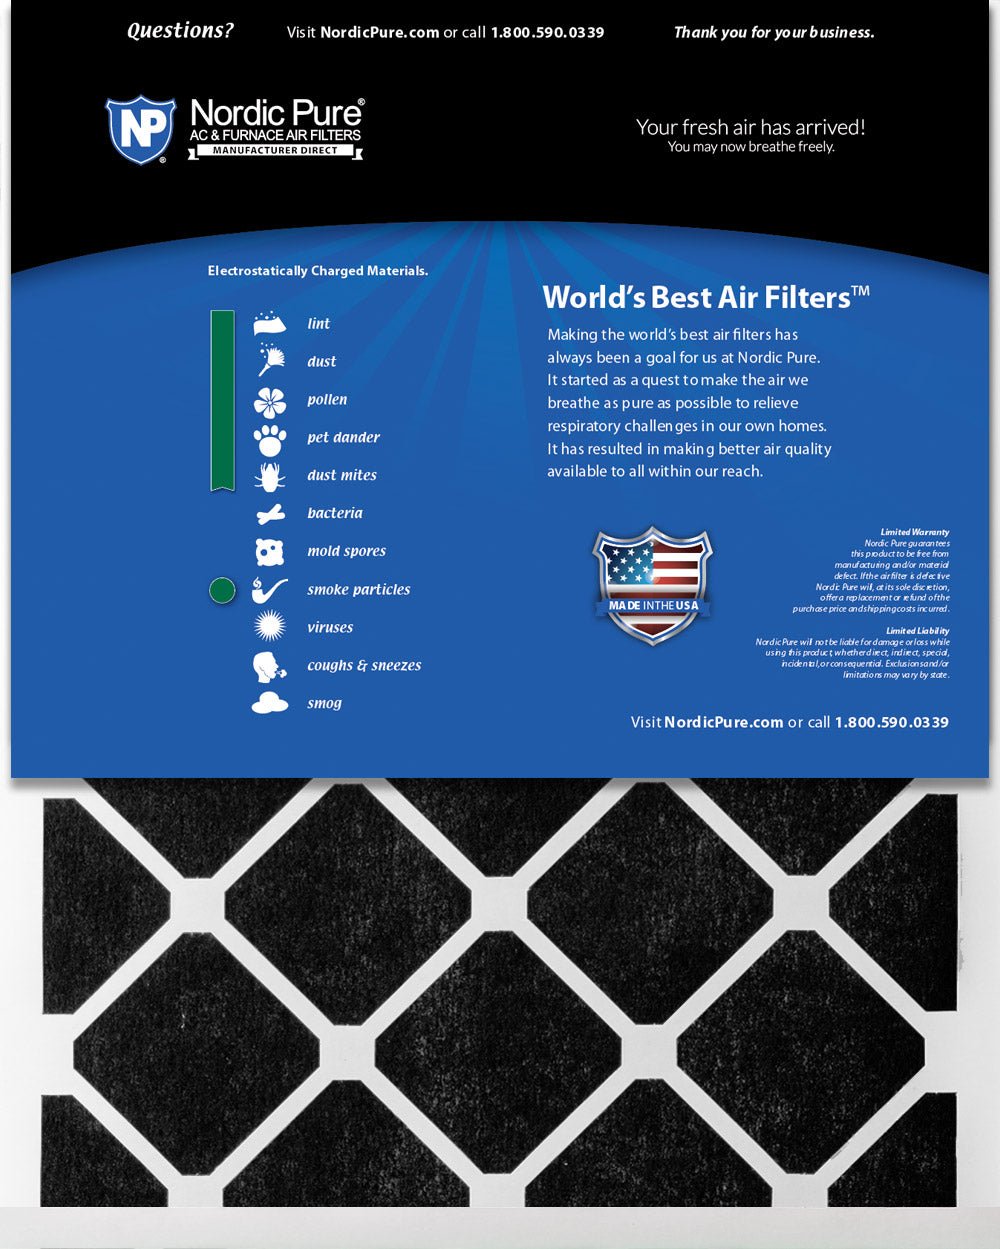 16x25x1 Pure Green Plus Carbon Eco-Friendly AC Furnace Air Filters